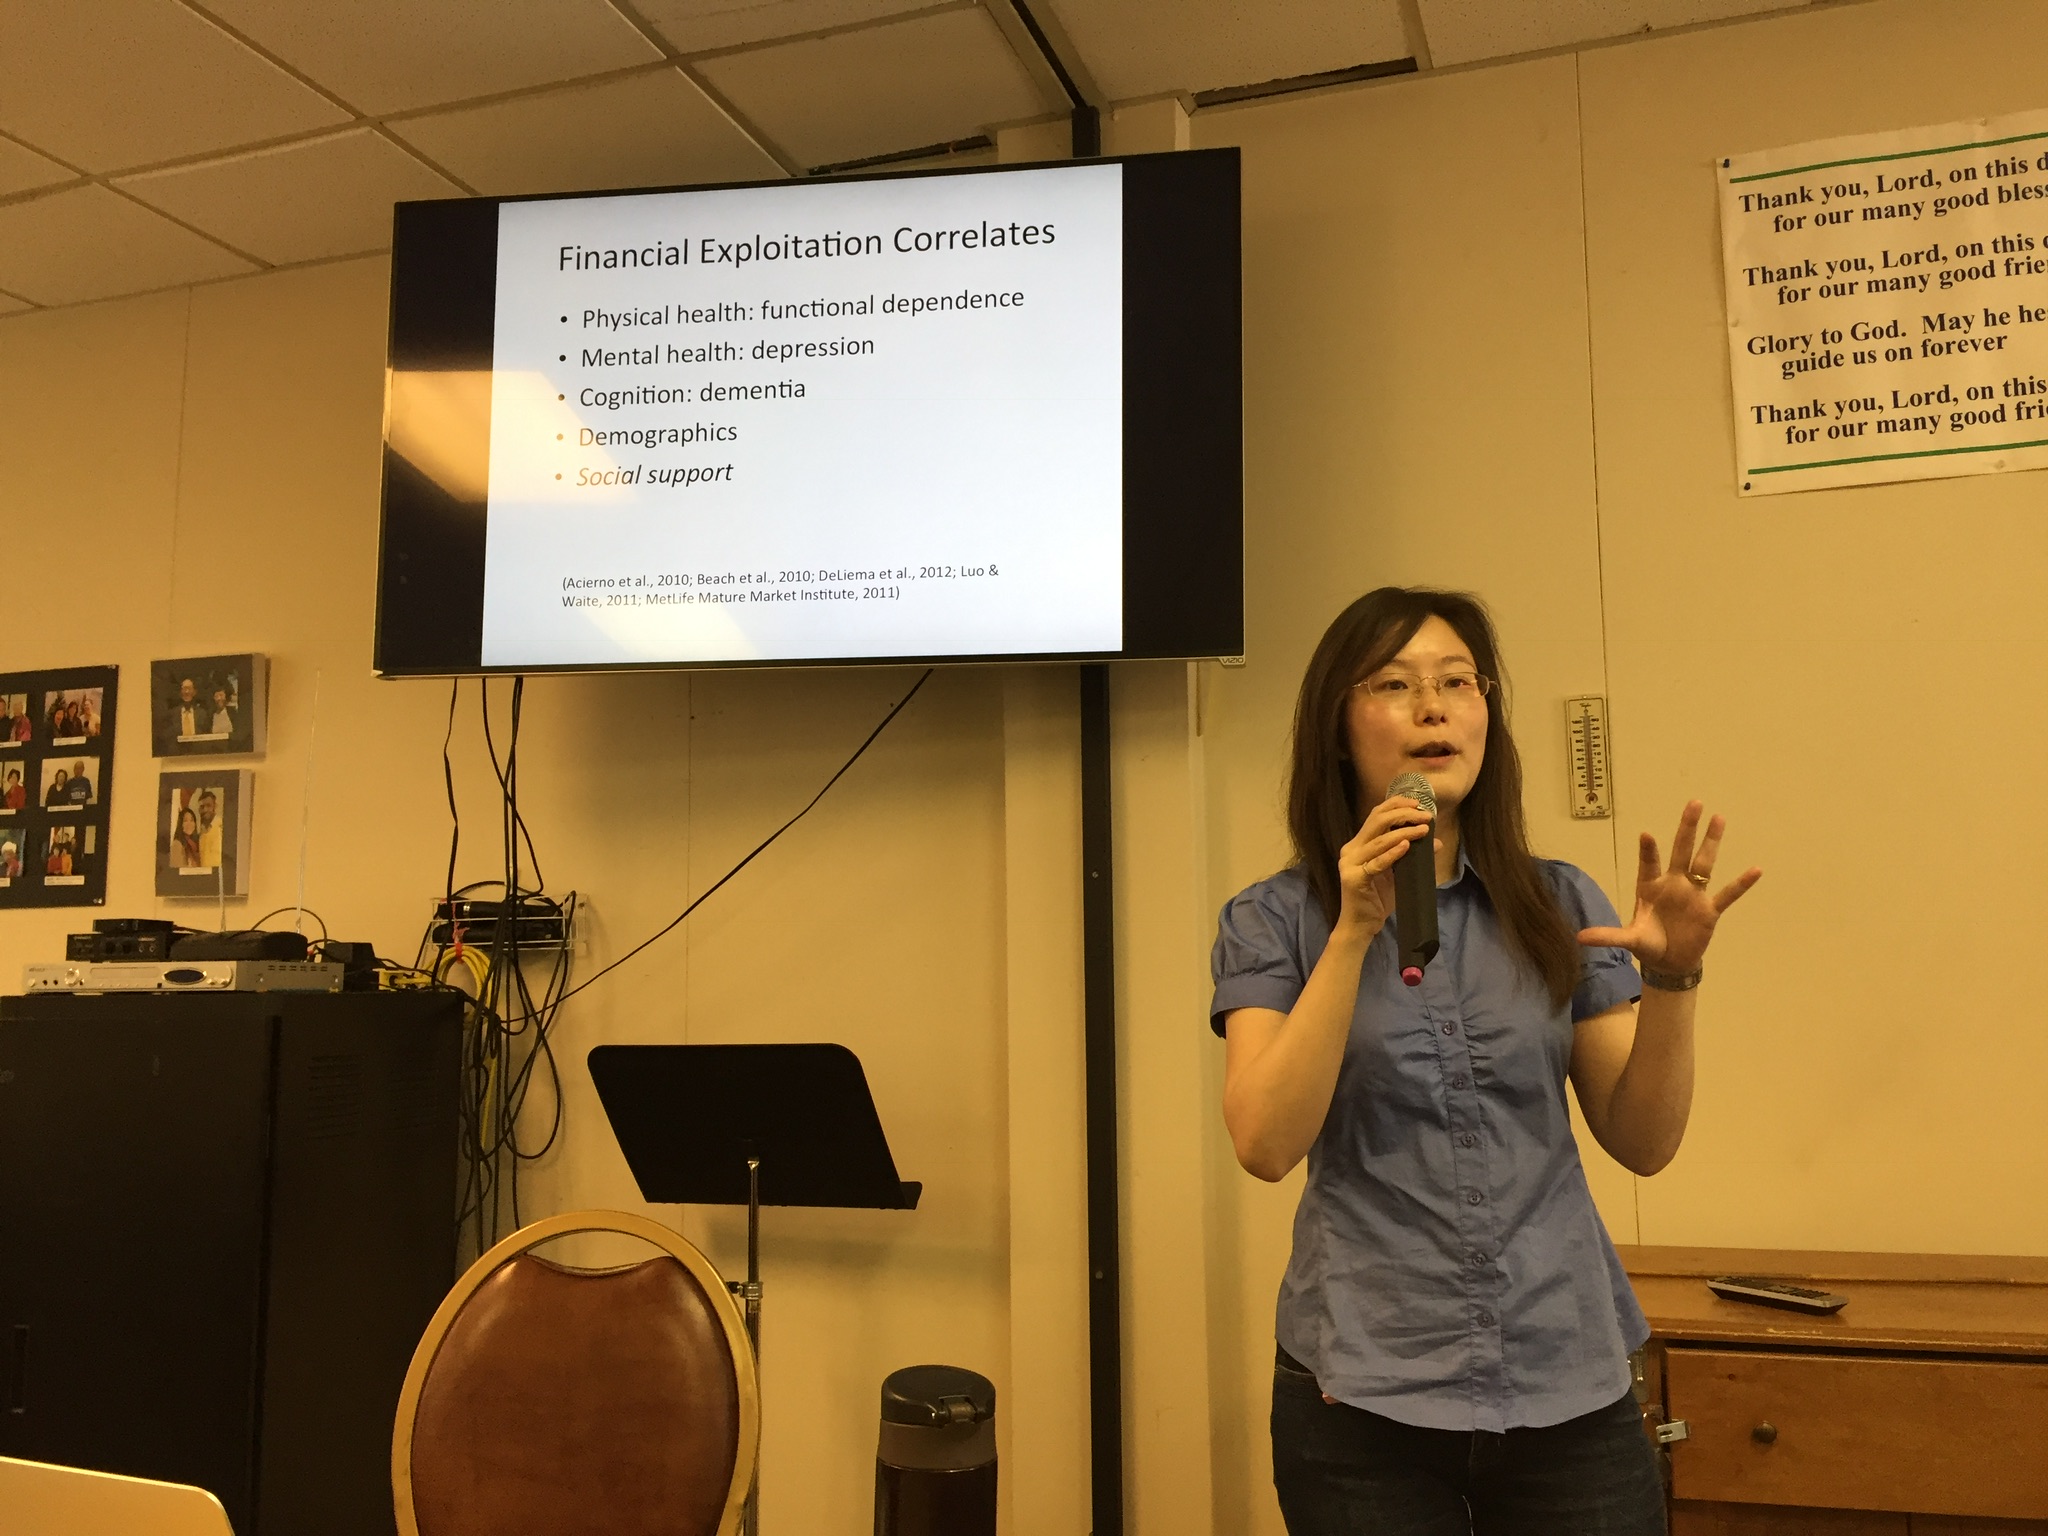 Liu gives a community talk on elder financial abuse to a group of older adults in a church.